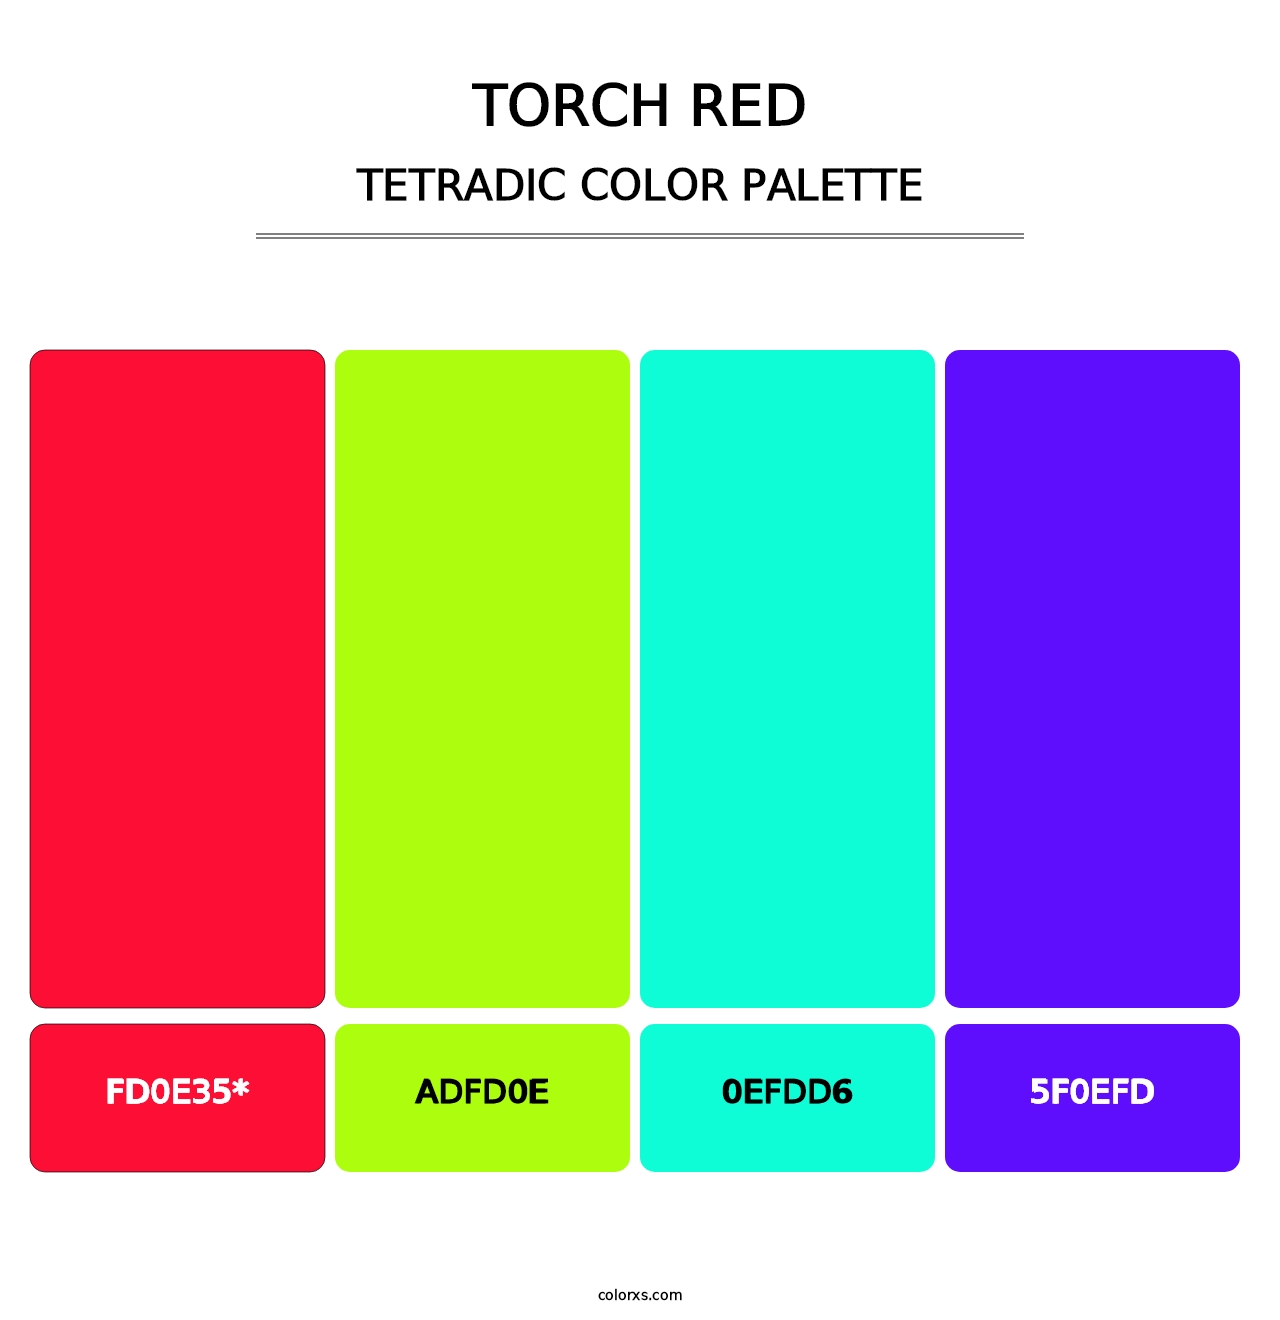 Torch Red - Tetradic Color Palette